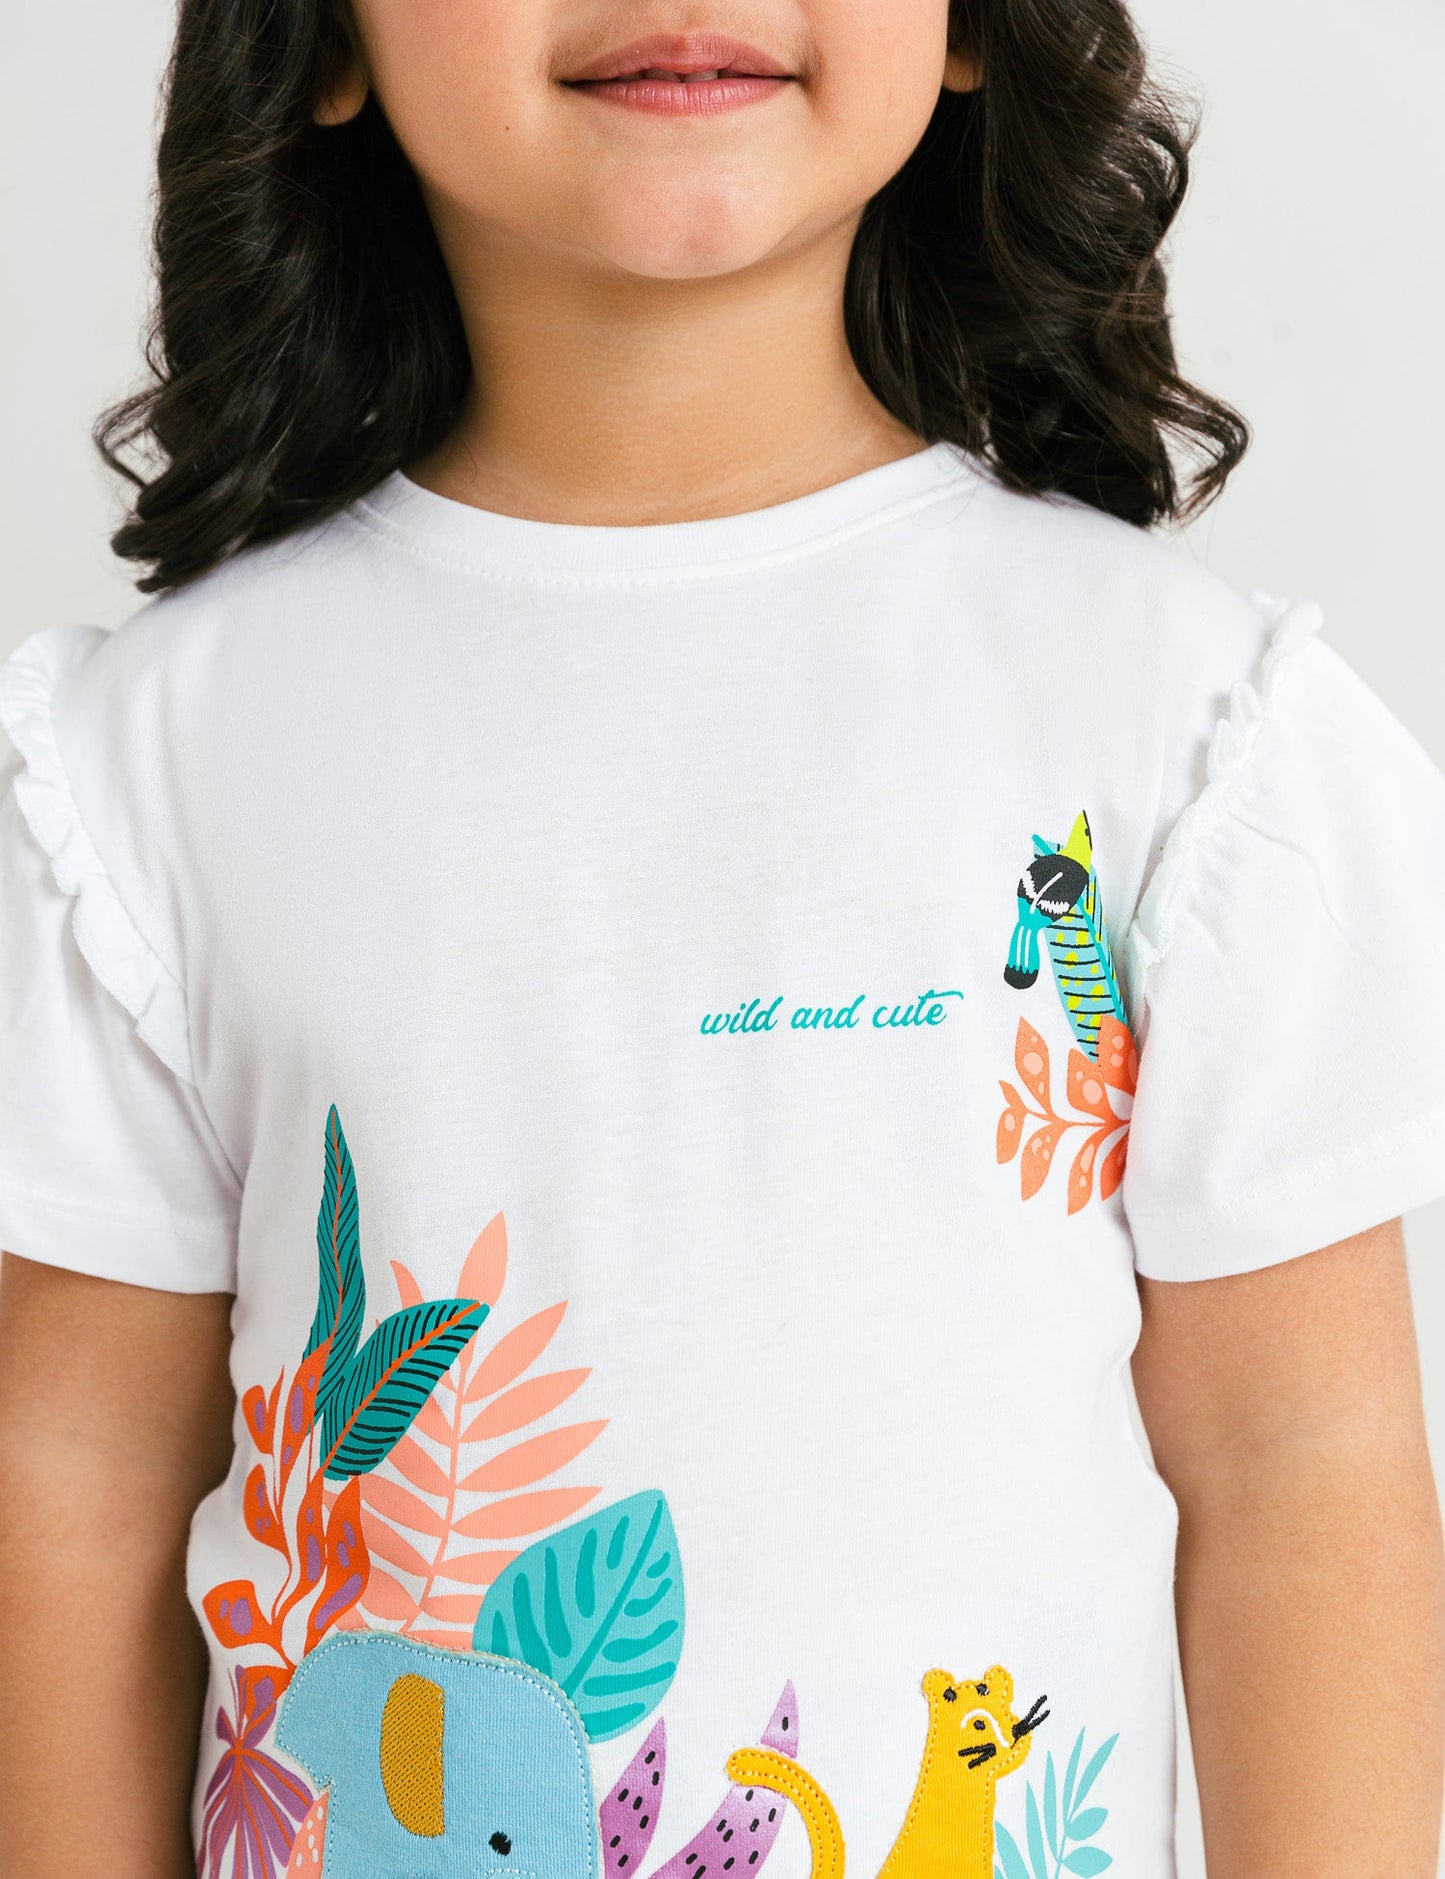 EMBROIDERED T-SHIRT WITH PRINTED ARTWORK